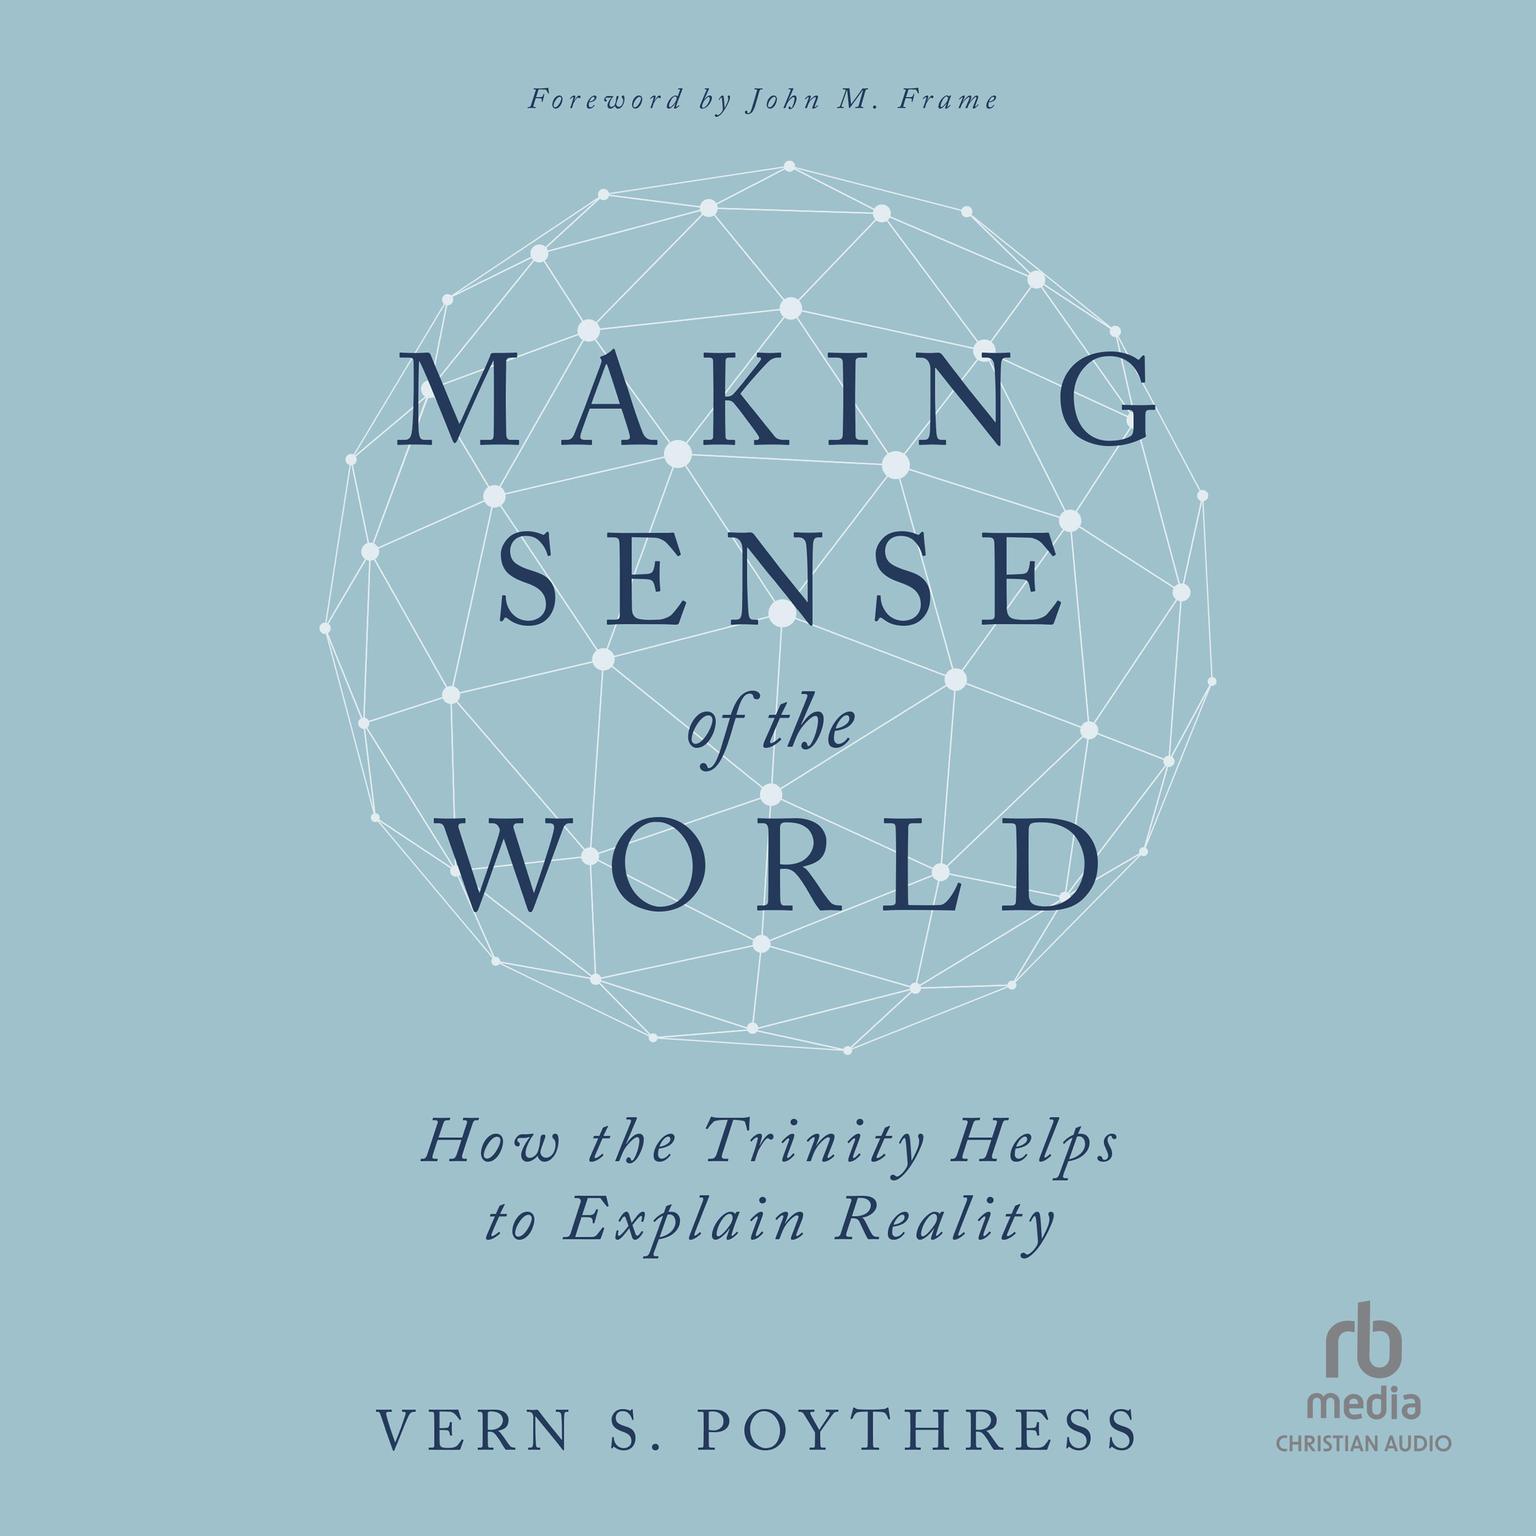 Making Sense of the World: How the Trinity Helps to Explain Reality Audiobook, by Vern S. Poythress